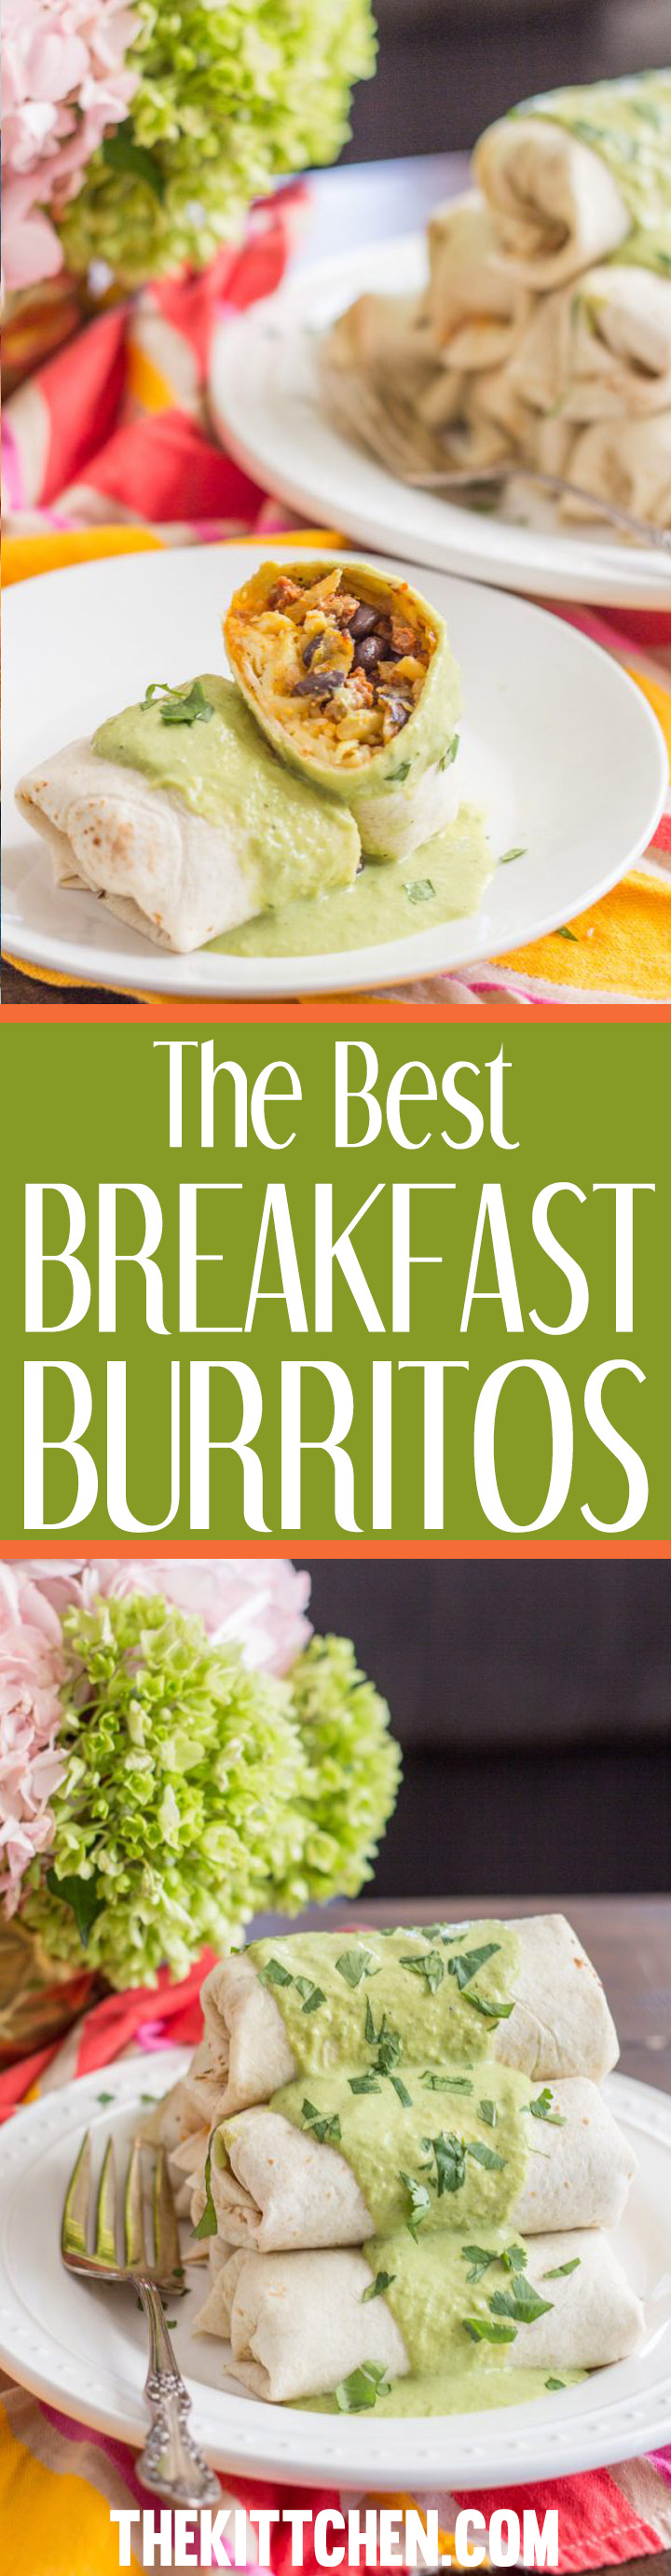 These are the best breakfast burritos that I have ever had, and I love breakfast burritos. I added all of my favorite breakfast foods: crumbled chorizo with sautéed onions, hash browns, black beans, scrambled eggs, and cheese. Then I poured homemade poblano cream sauce on top and added a sprinkle of chopped cilantro. What more could you want on a Saturday morning?